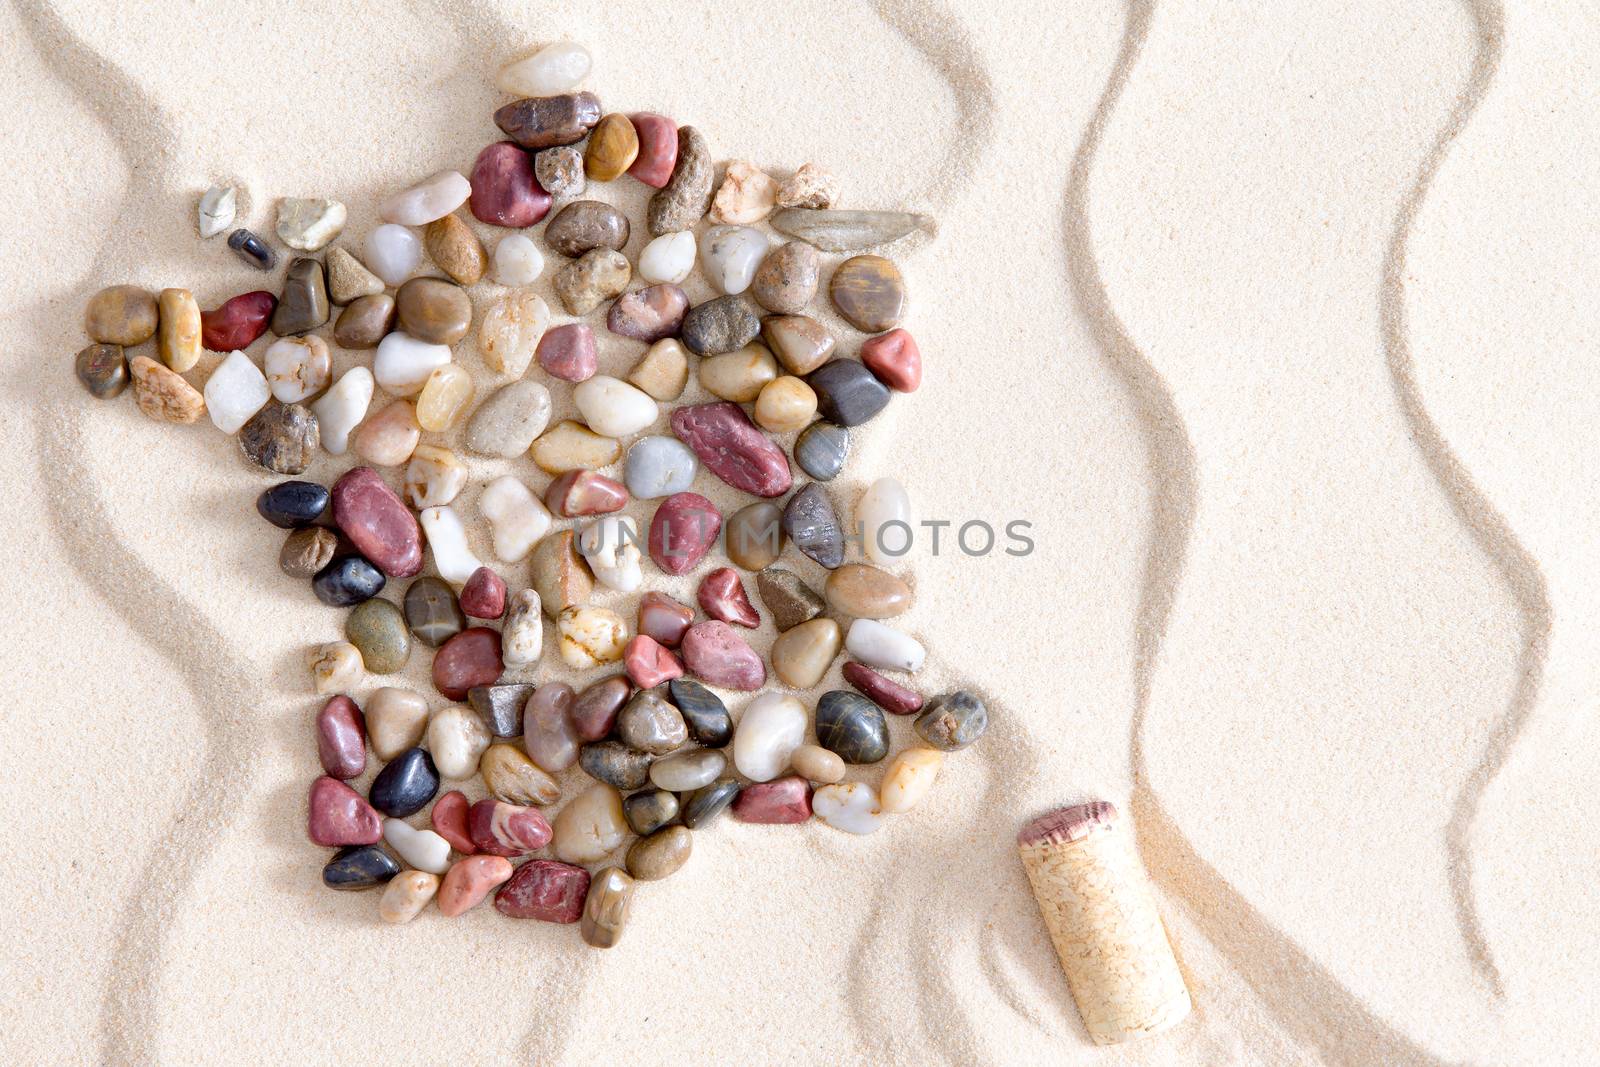 Map of France from colorful waterworn pebbles by coskun